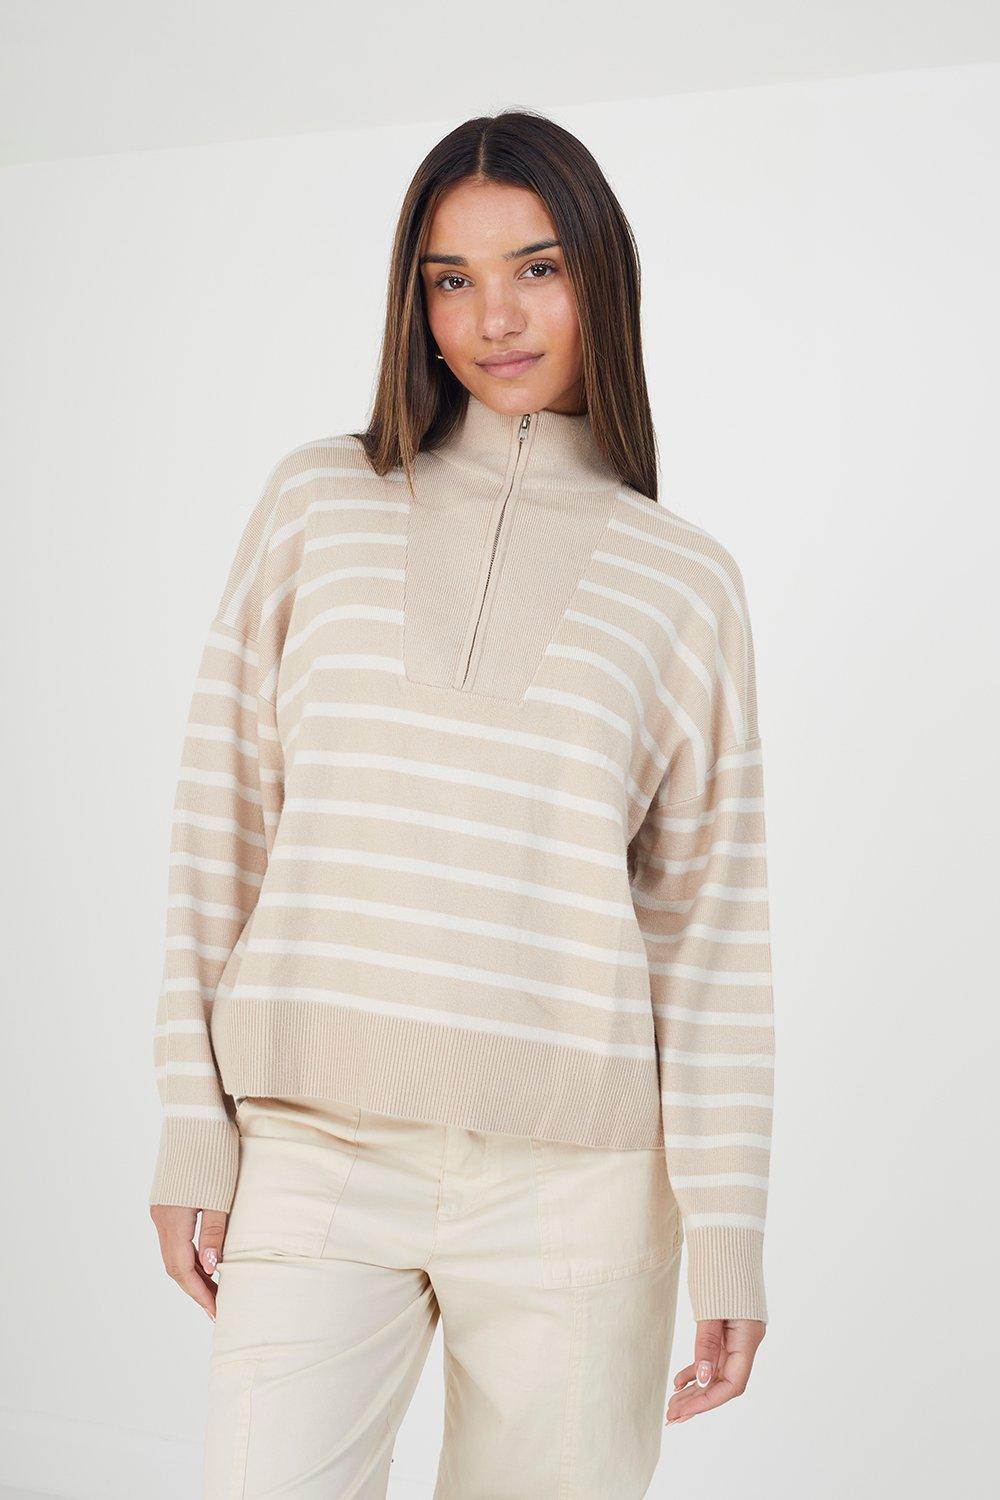 Stripes | Striped Tops & Striped Trousers | Oasis UK